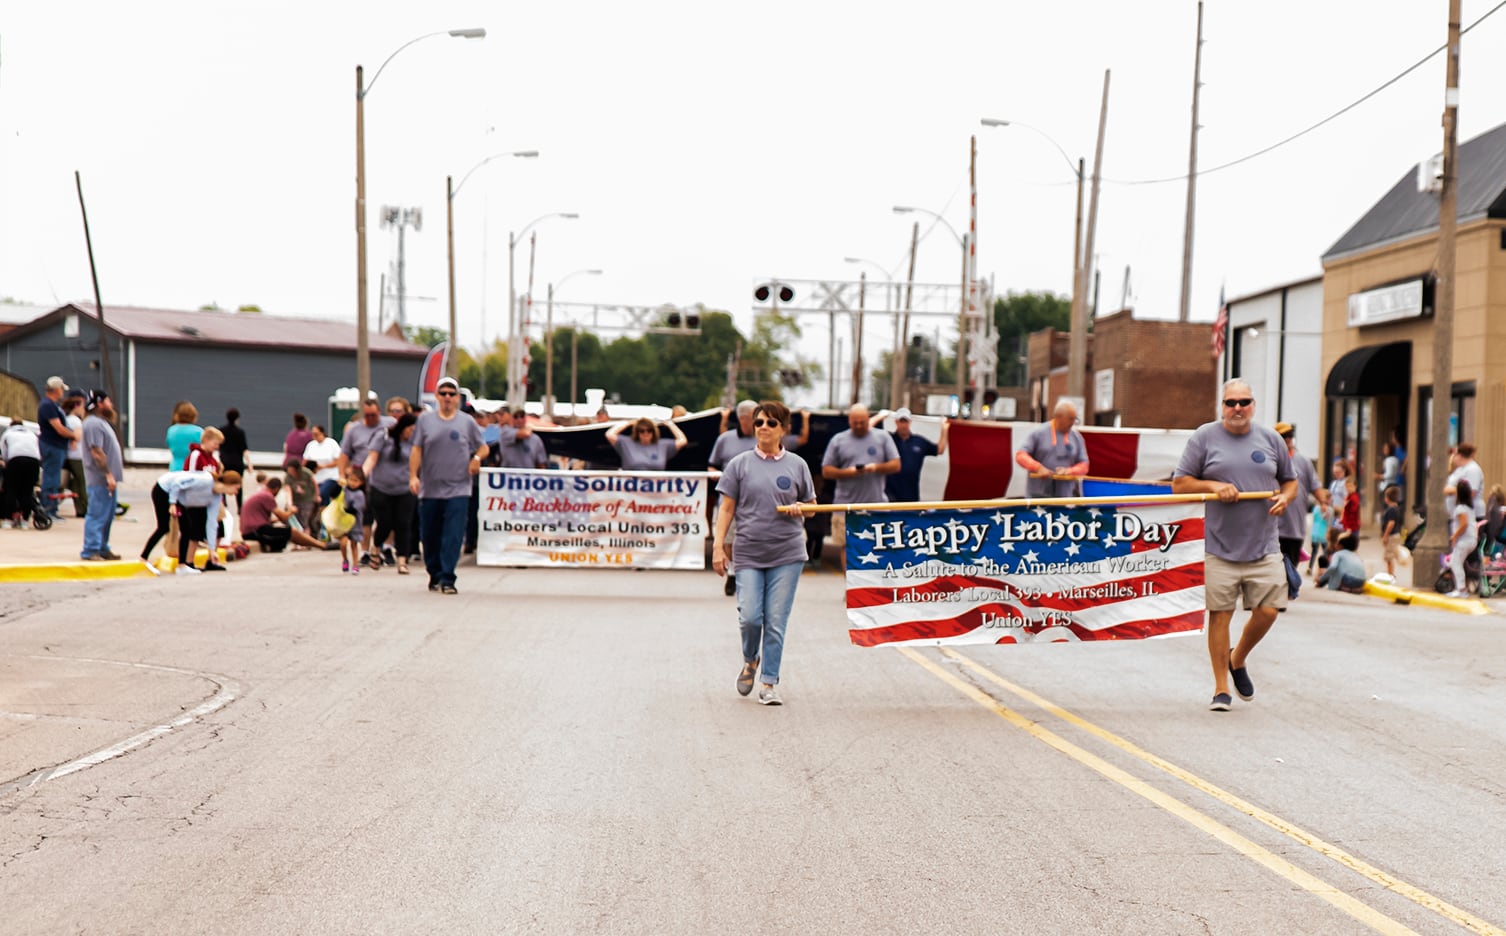 Streator to host Labor Day parade after years without one